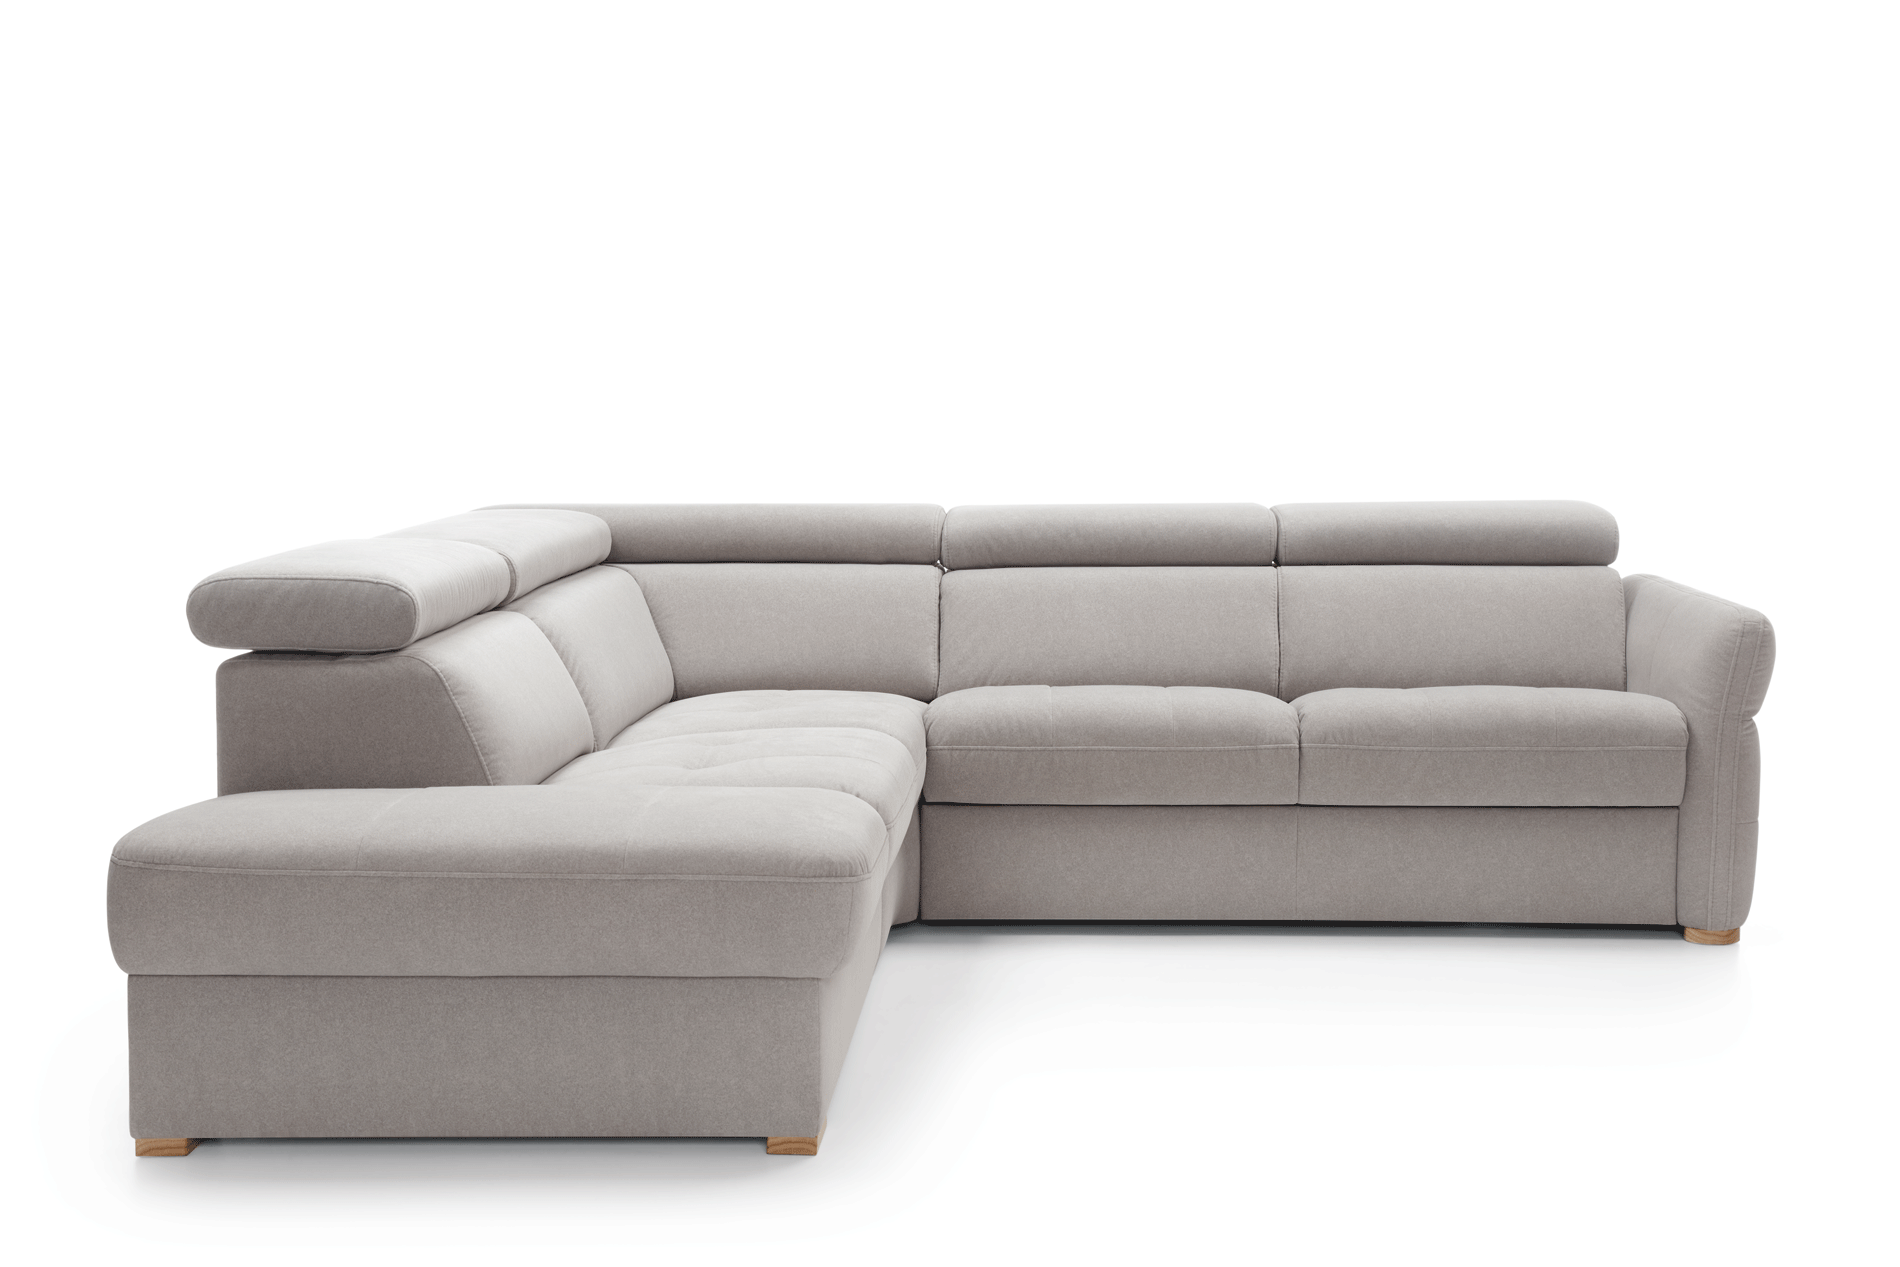 Brands Status Modern Collections, Italy Massimo Sectional w/ storage